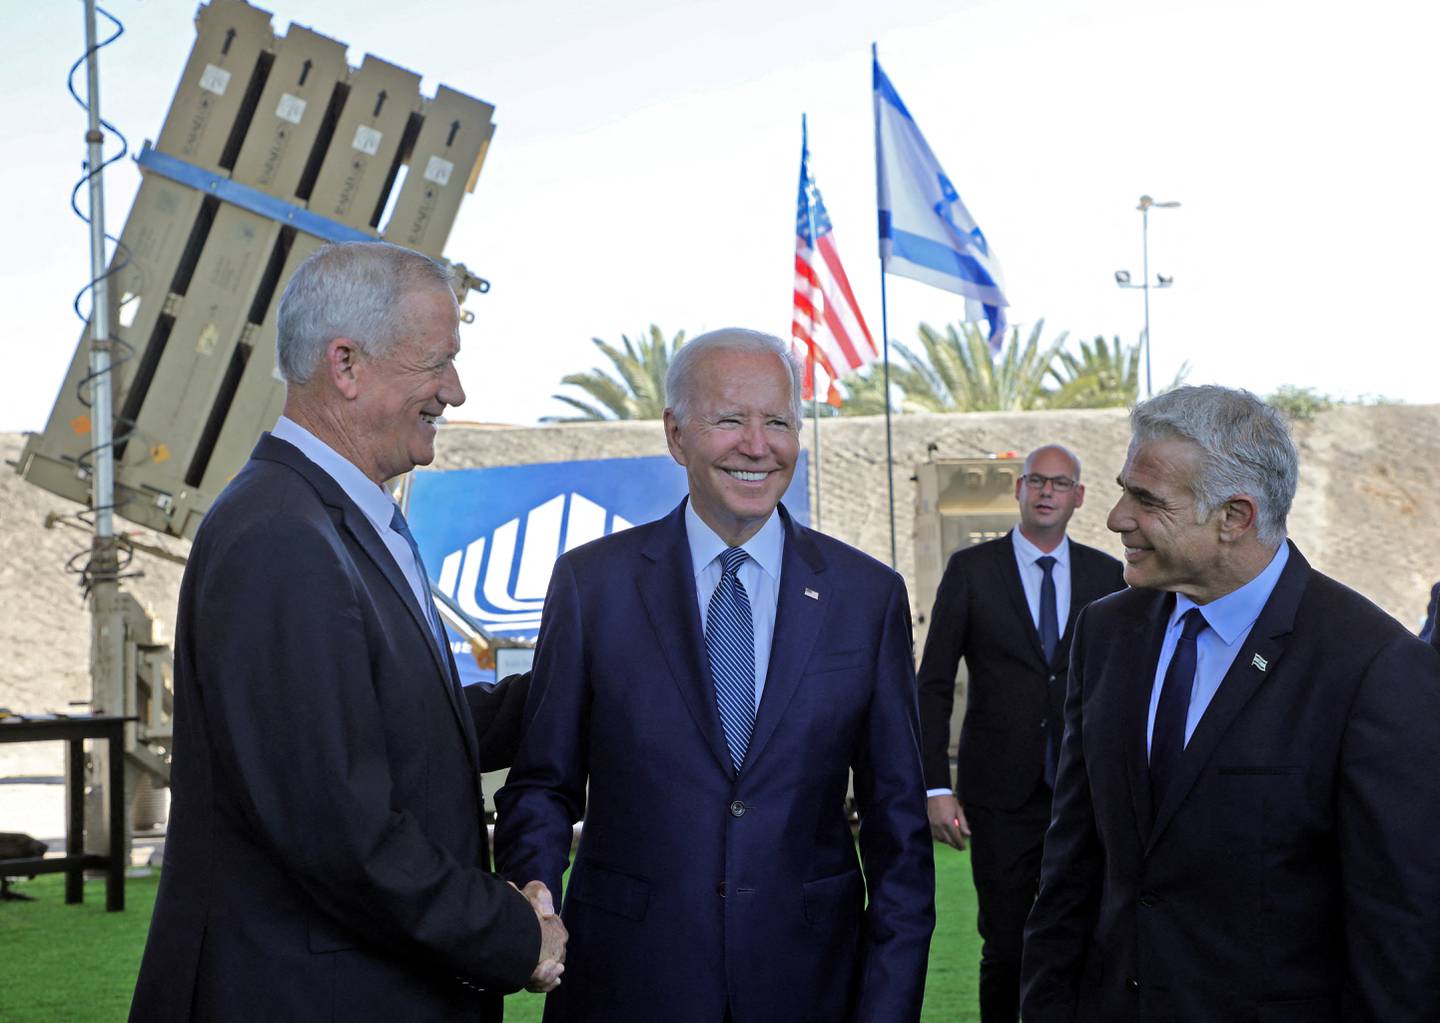 US President Joe Biden, Israeli Prime Minister Yair Lapid and Israeli Defence Minister Benny Gantz stand in front of Israel's Iron Dome defence system in Lod last week. Reuters